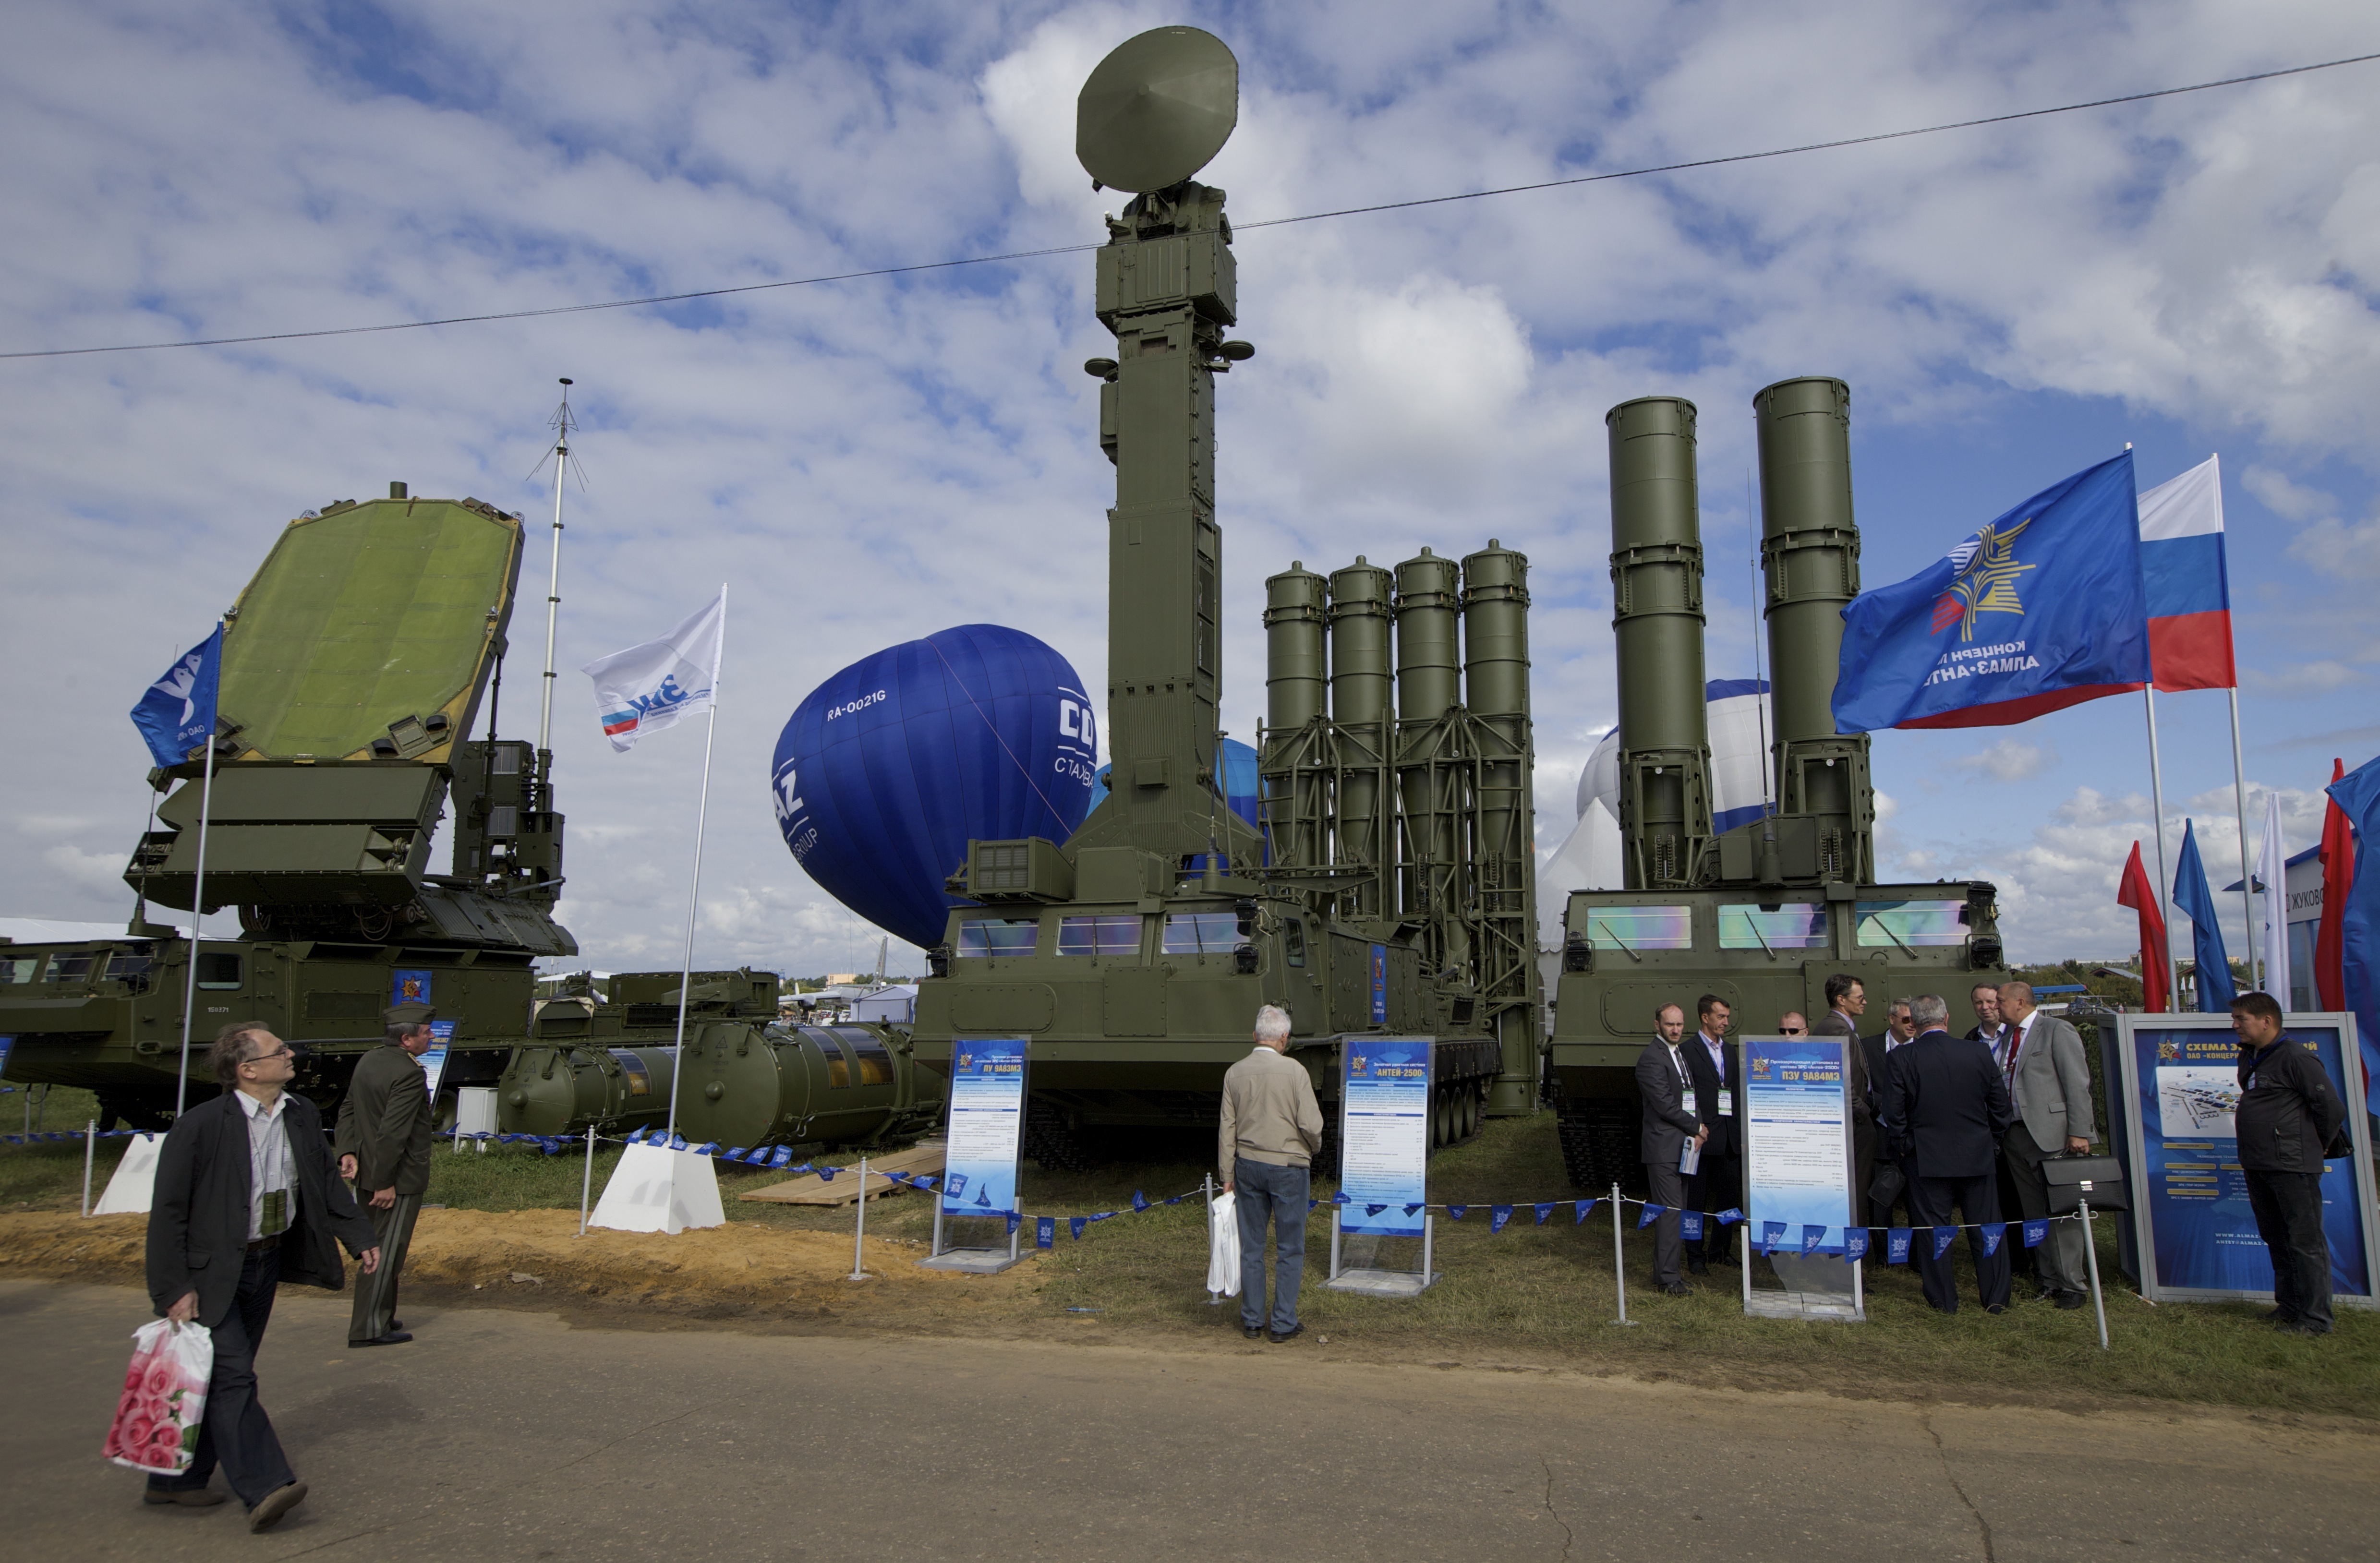 The Russian air defence system missile system Antey 2500, or S-300 VM 